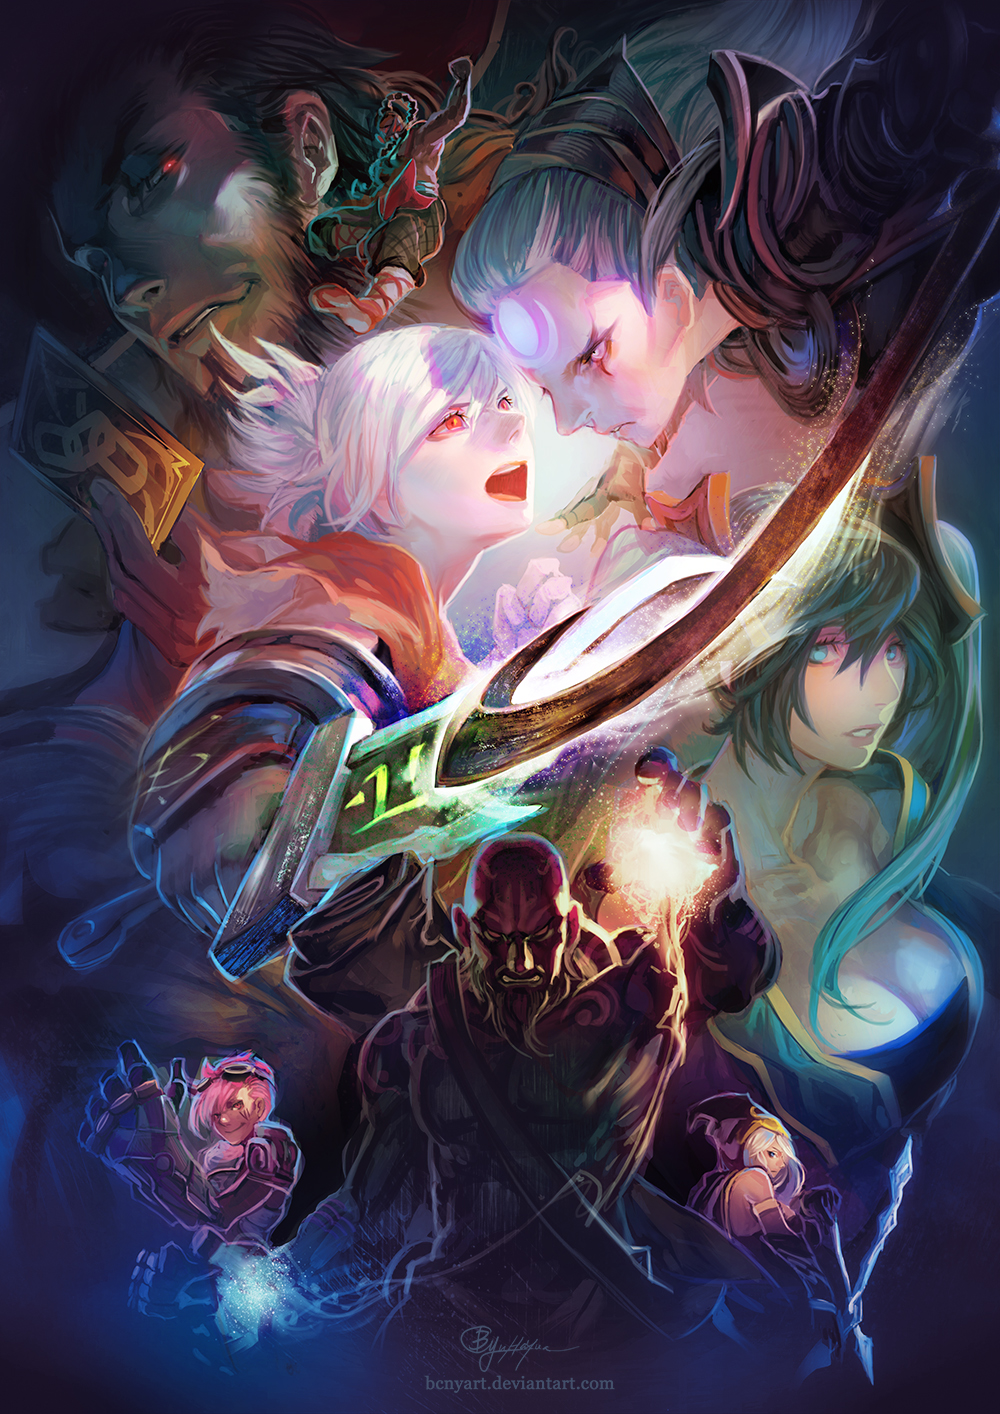 2boys 5girls ashe_(league_of_legends) b.c.n.y. beard blue_hair breasts card cleavage diana_(league_of_legends) facial_hair hat highres league_of_legends lee_sin long_hair multiple_boys multiple_girls pink_hair power_glove red_eyes riven_(league_of_legends) ryze short_hair sona_buvelle sword tattoo twisted_fate vi_(league_of_legends) weapon white_hair